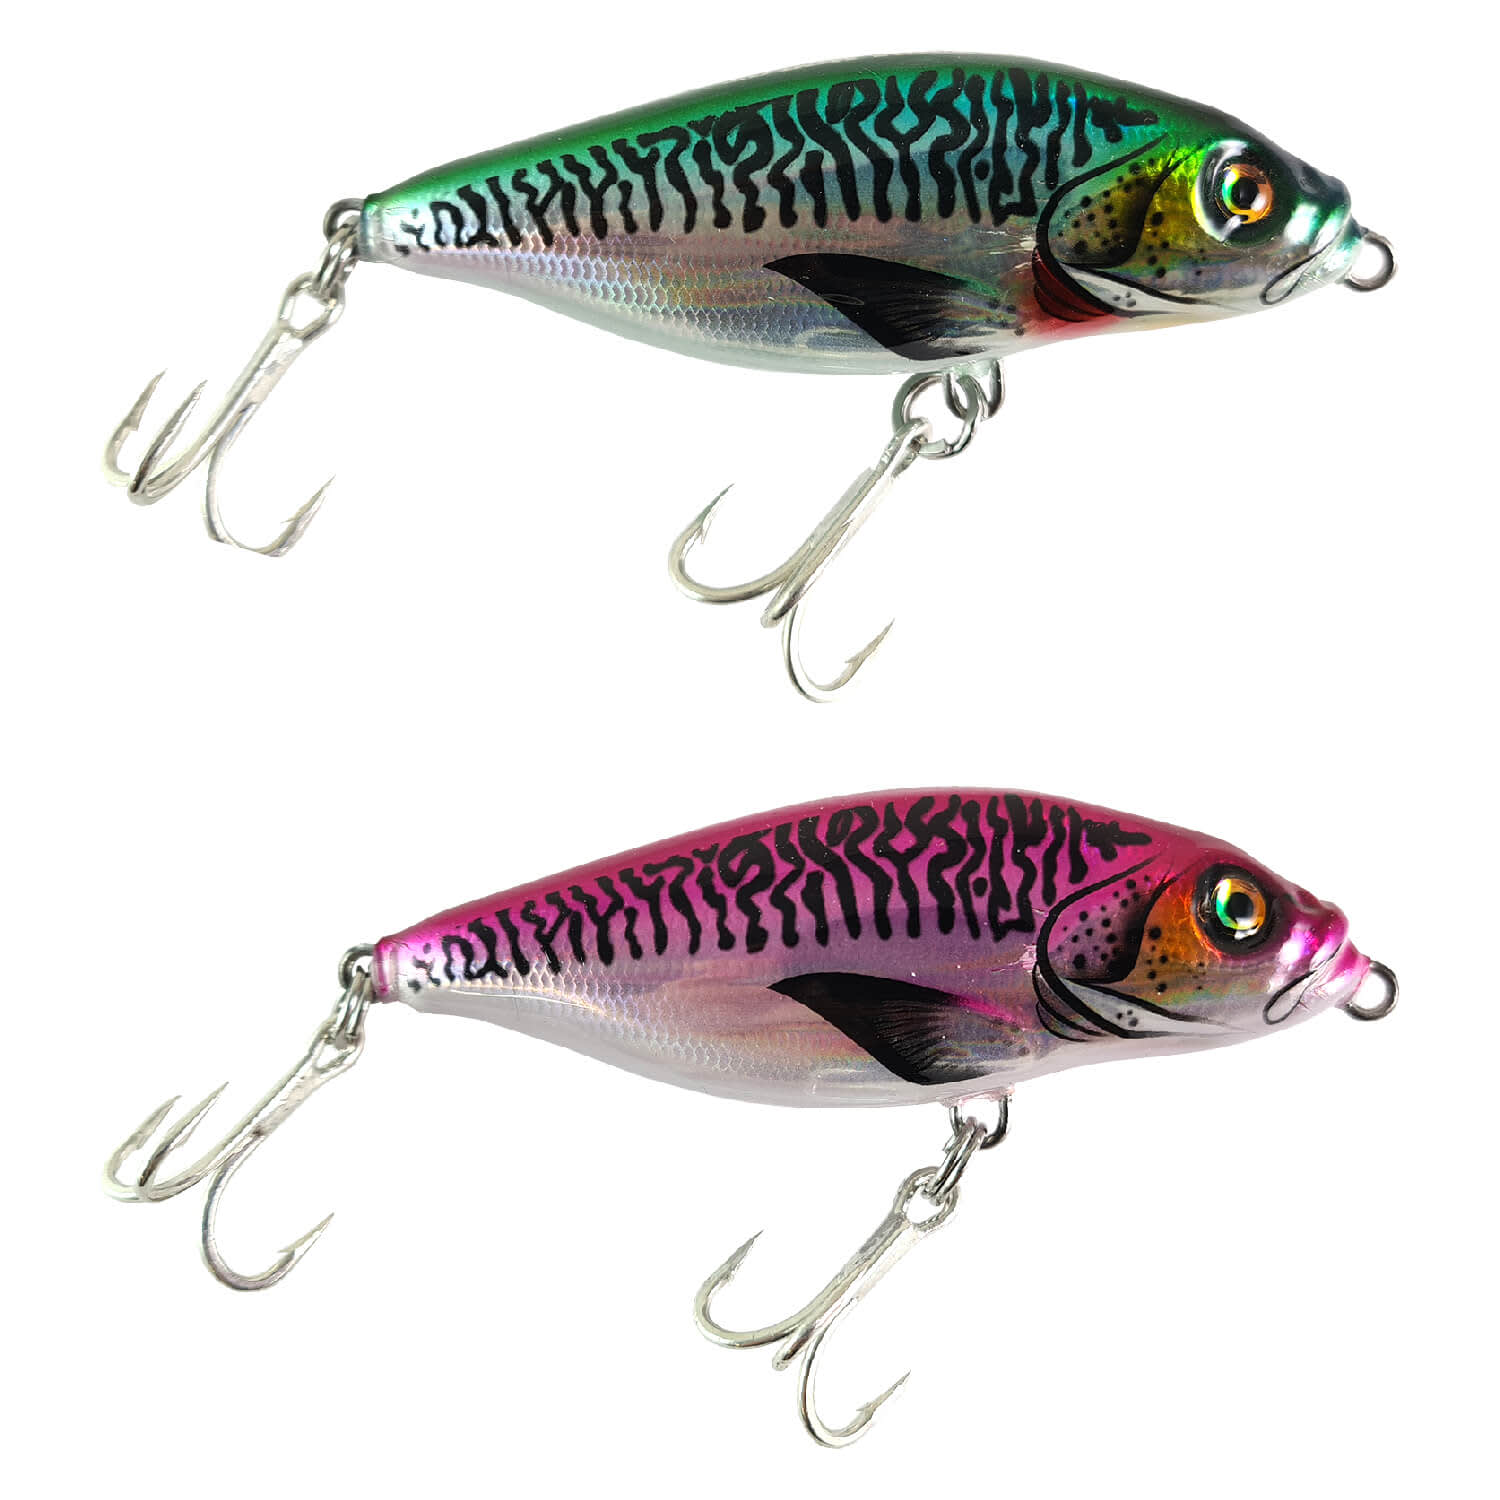 https://koeder-laden.mo.cloudinary.net/out/pictures/master/product/1/hybrida-mini-gt-tropic-edition-stickbait-alle.jpg